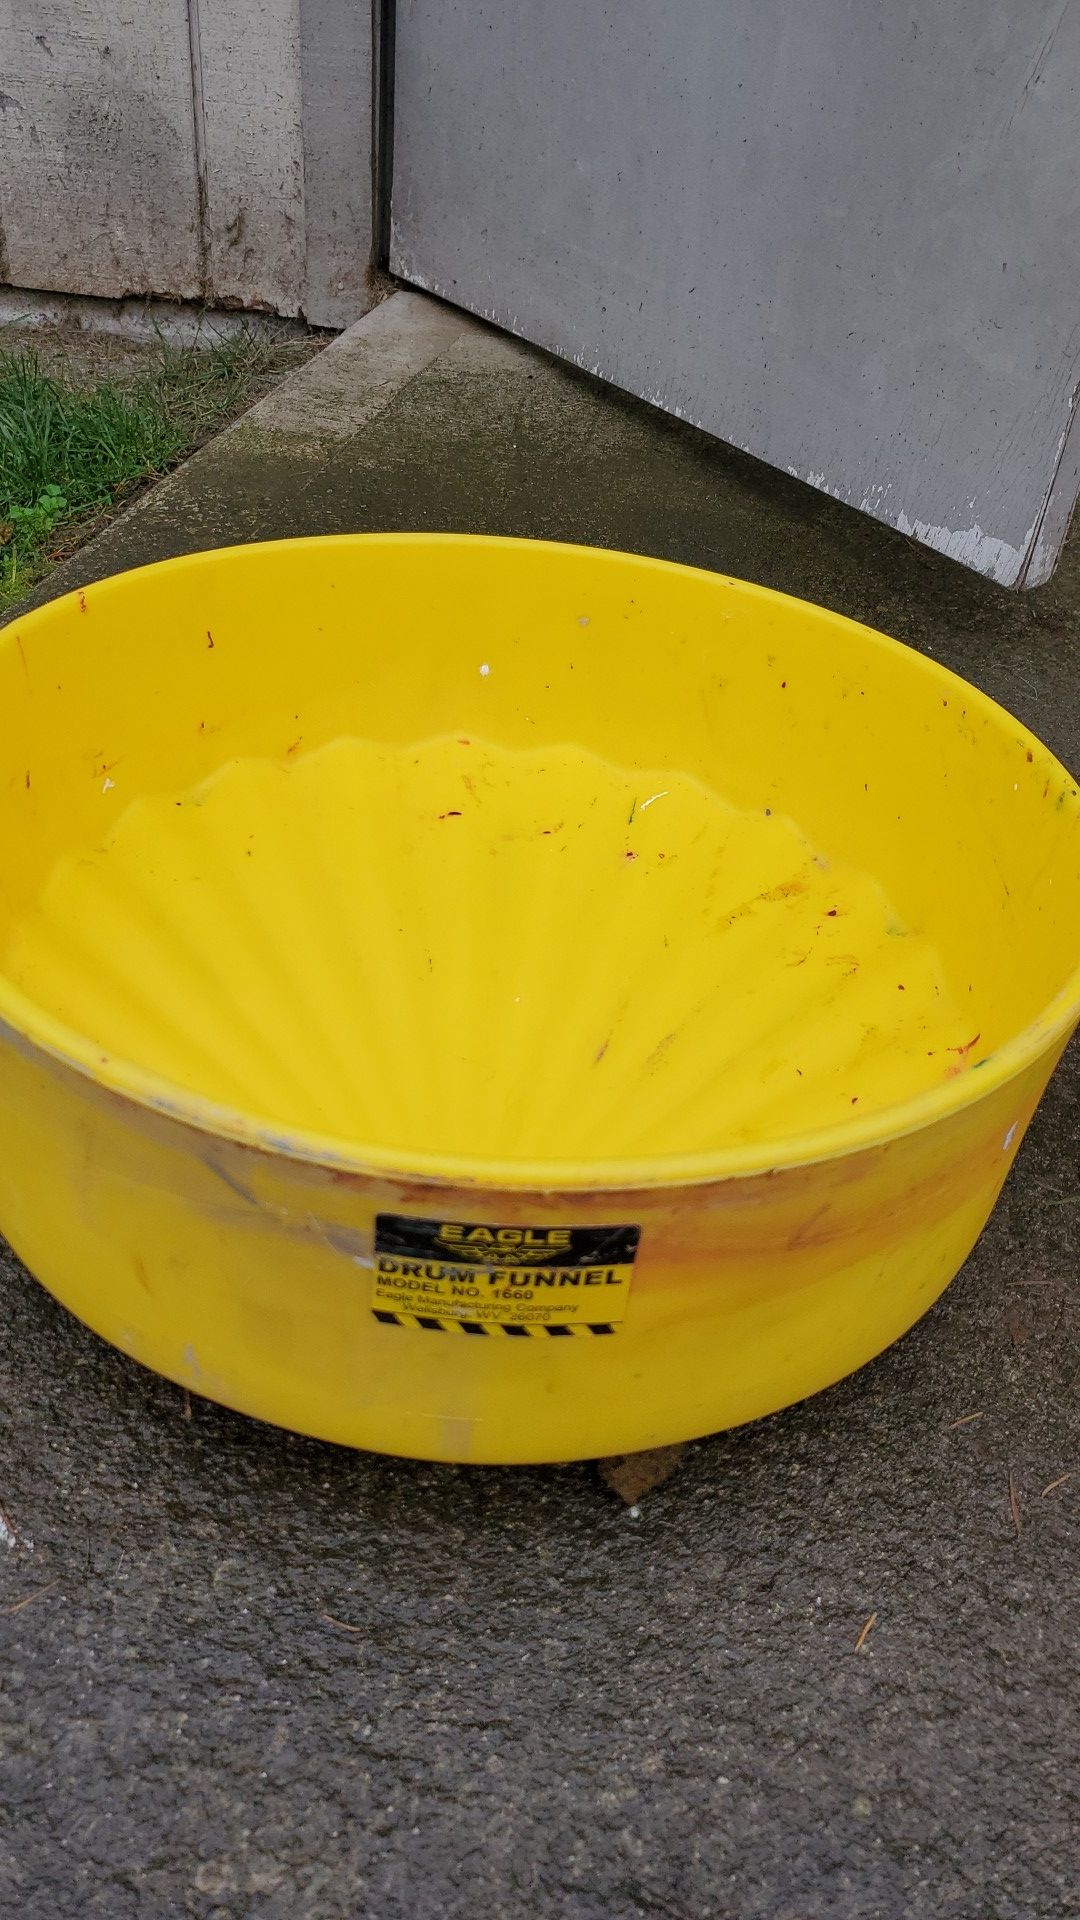 55 gallon drum funnel and lid